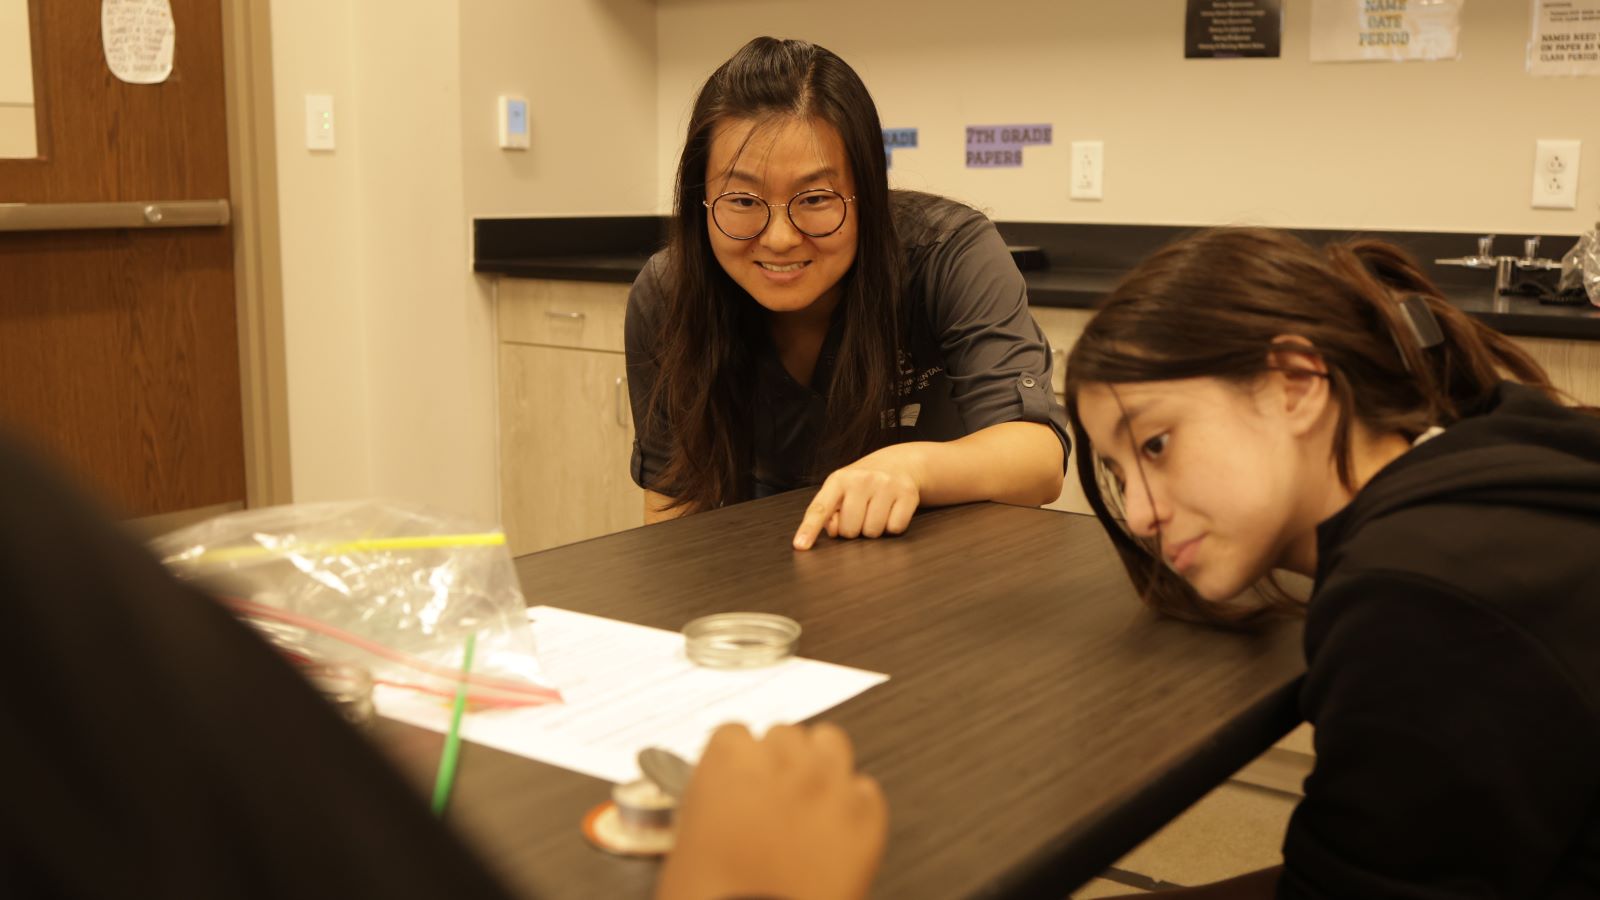 Yang Li, Ph.D., assistant professor of environmental science at Baylor, leads students at G.W. Carver Middle School in Waco on a STEM Day experiment on air quality and human health.